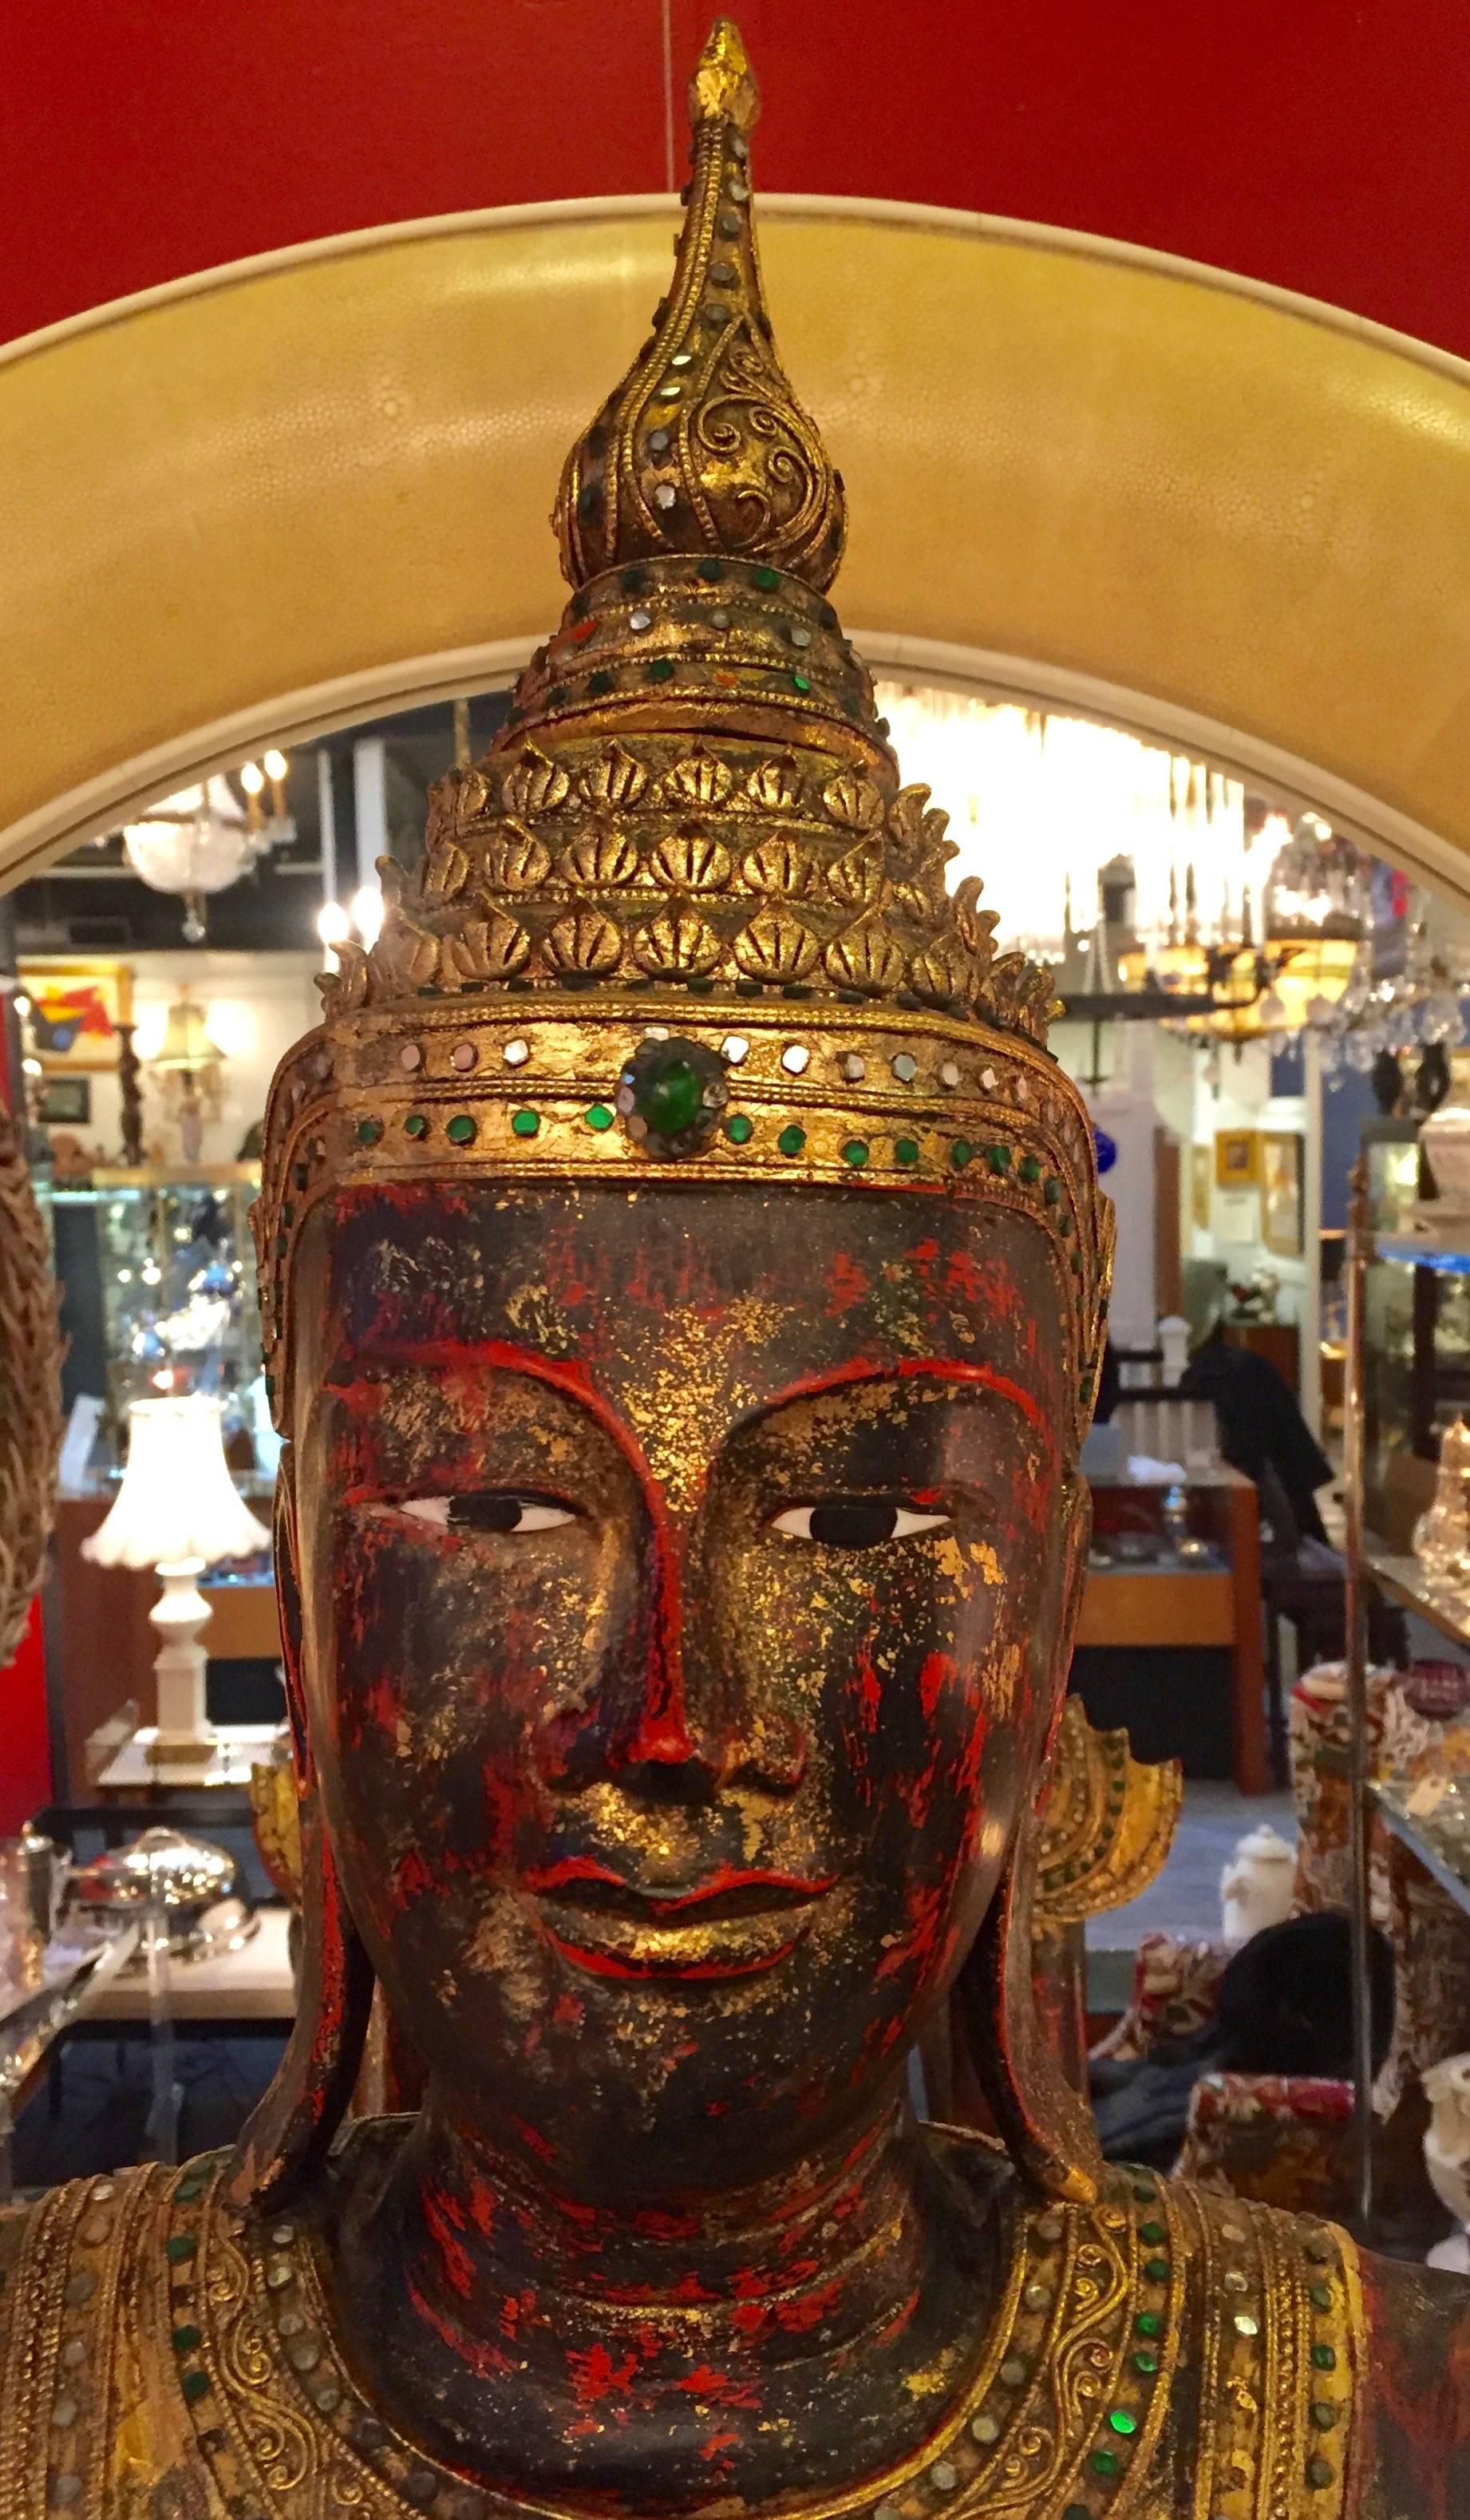 Lifesize 6 ft tall burnished gold Thai Buddha with red underpaint and meticulous colored cut-glass jewels adorning the robe and head dress. Very impressive.